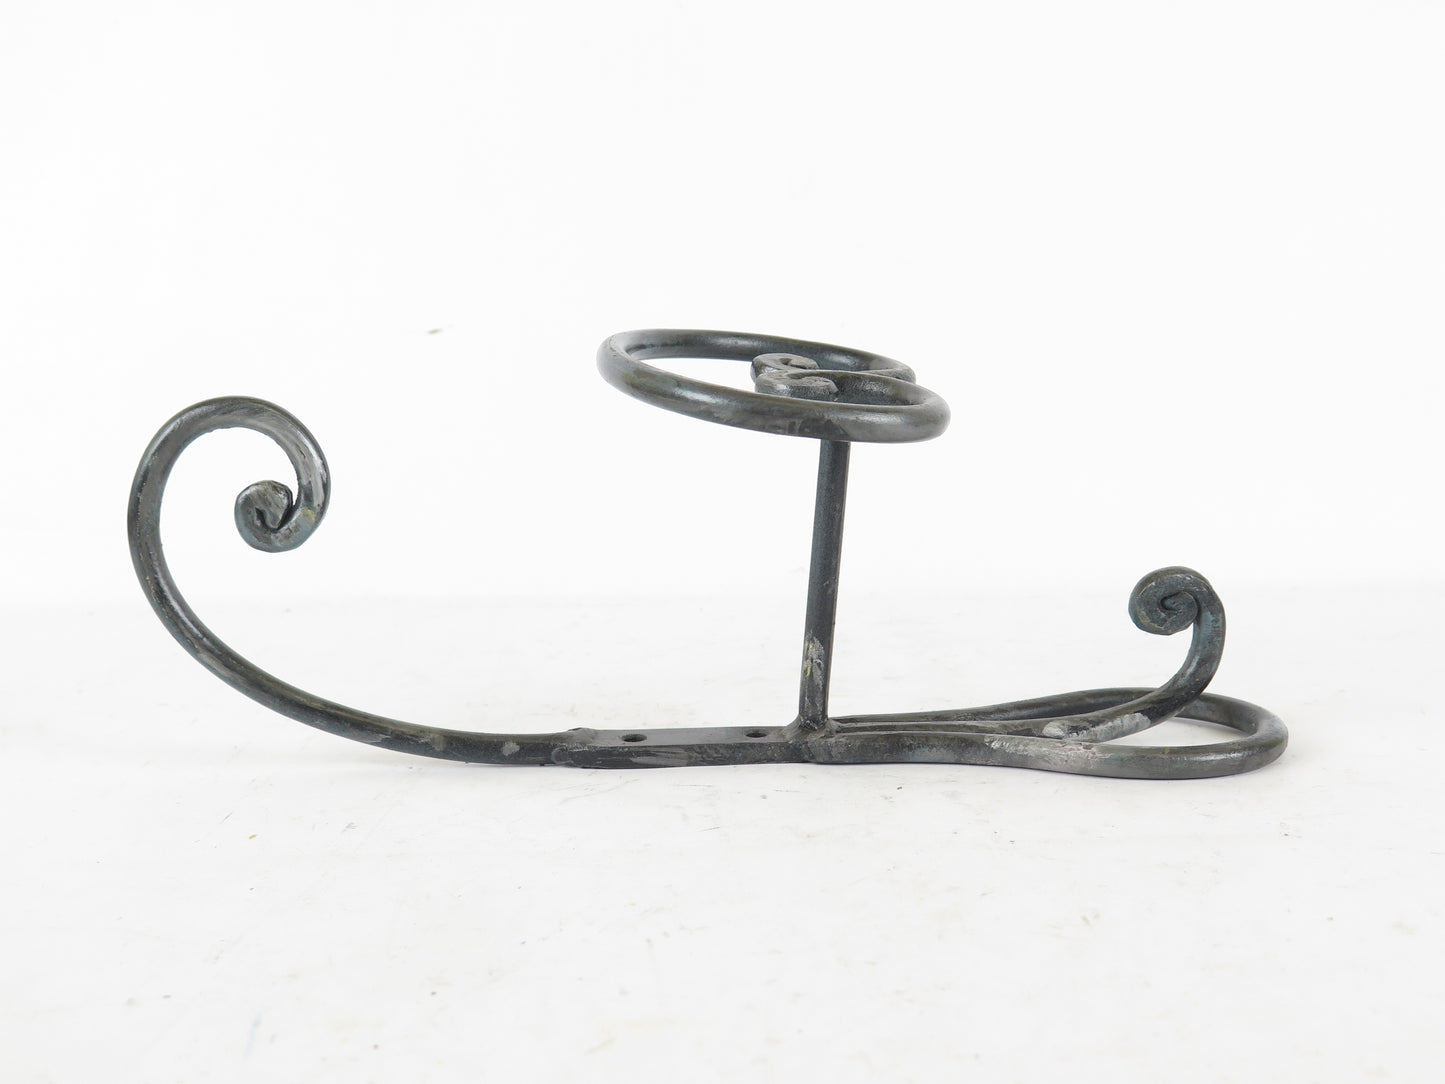 TWO SINGLE WALL COAT HANGER WALL COAT HANGER VINTAGE WROUGHT IRON CH16